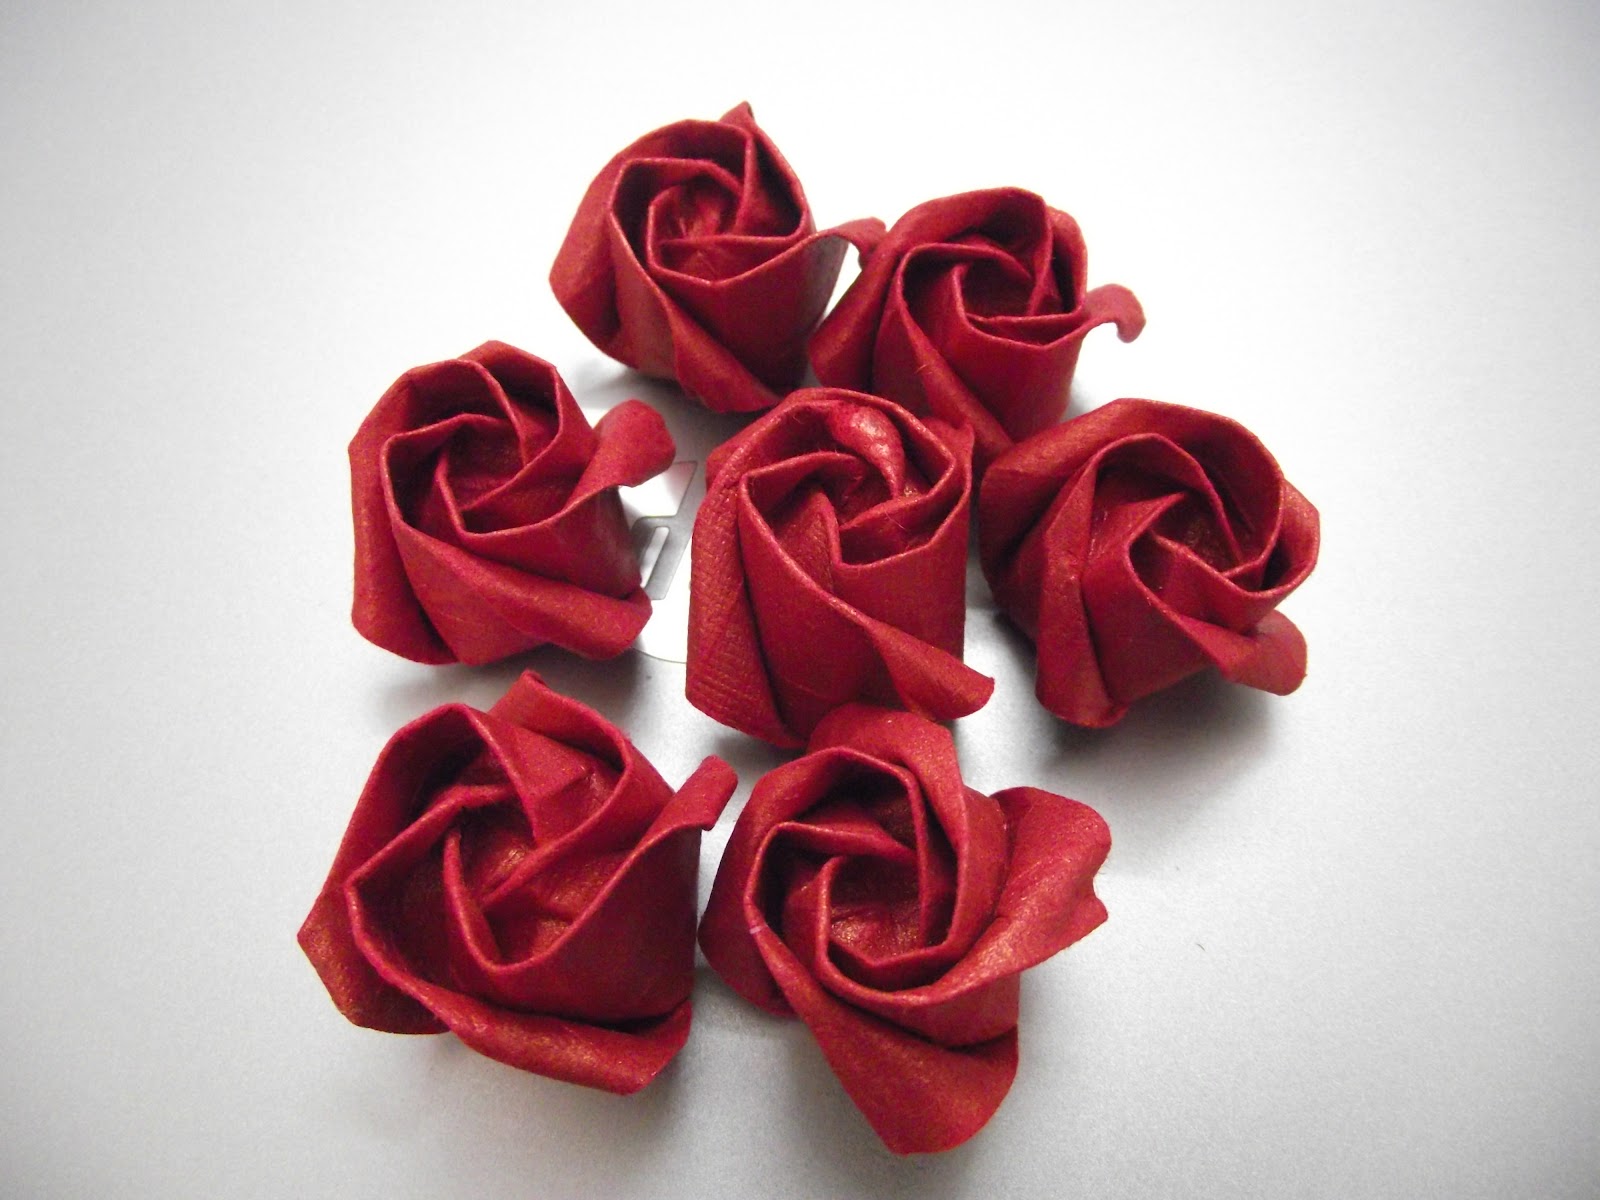 used red colour handmade paper to make the roses.